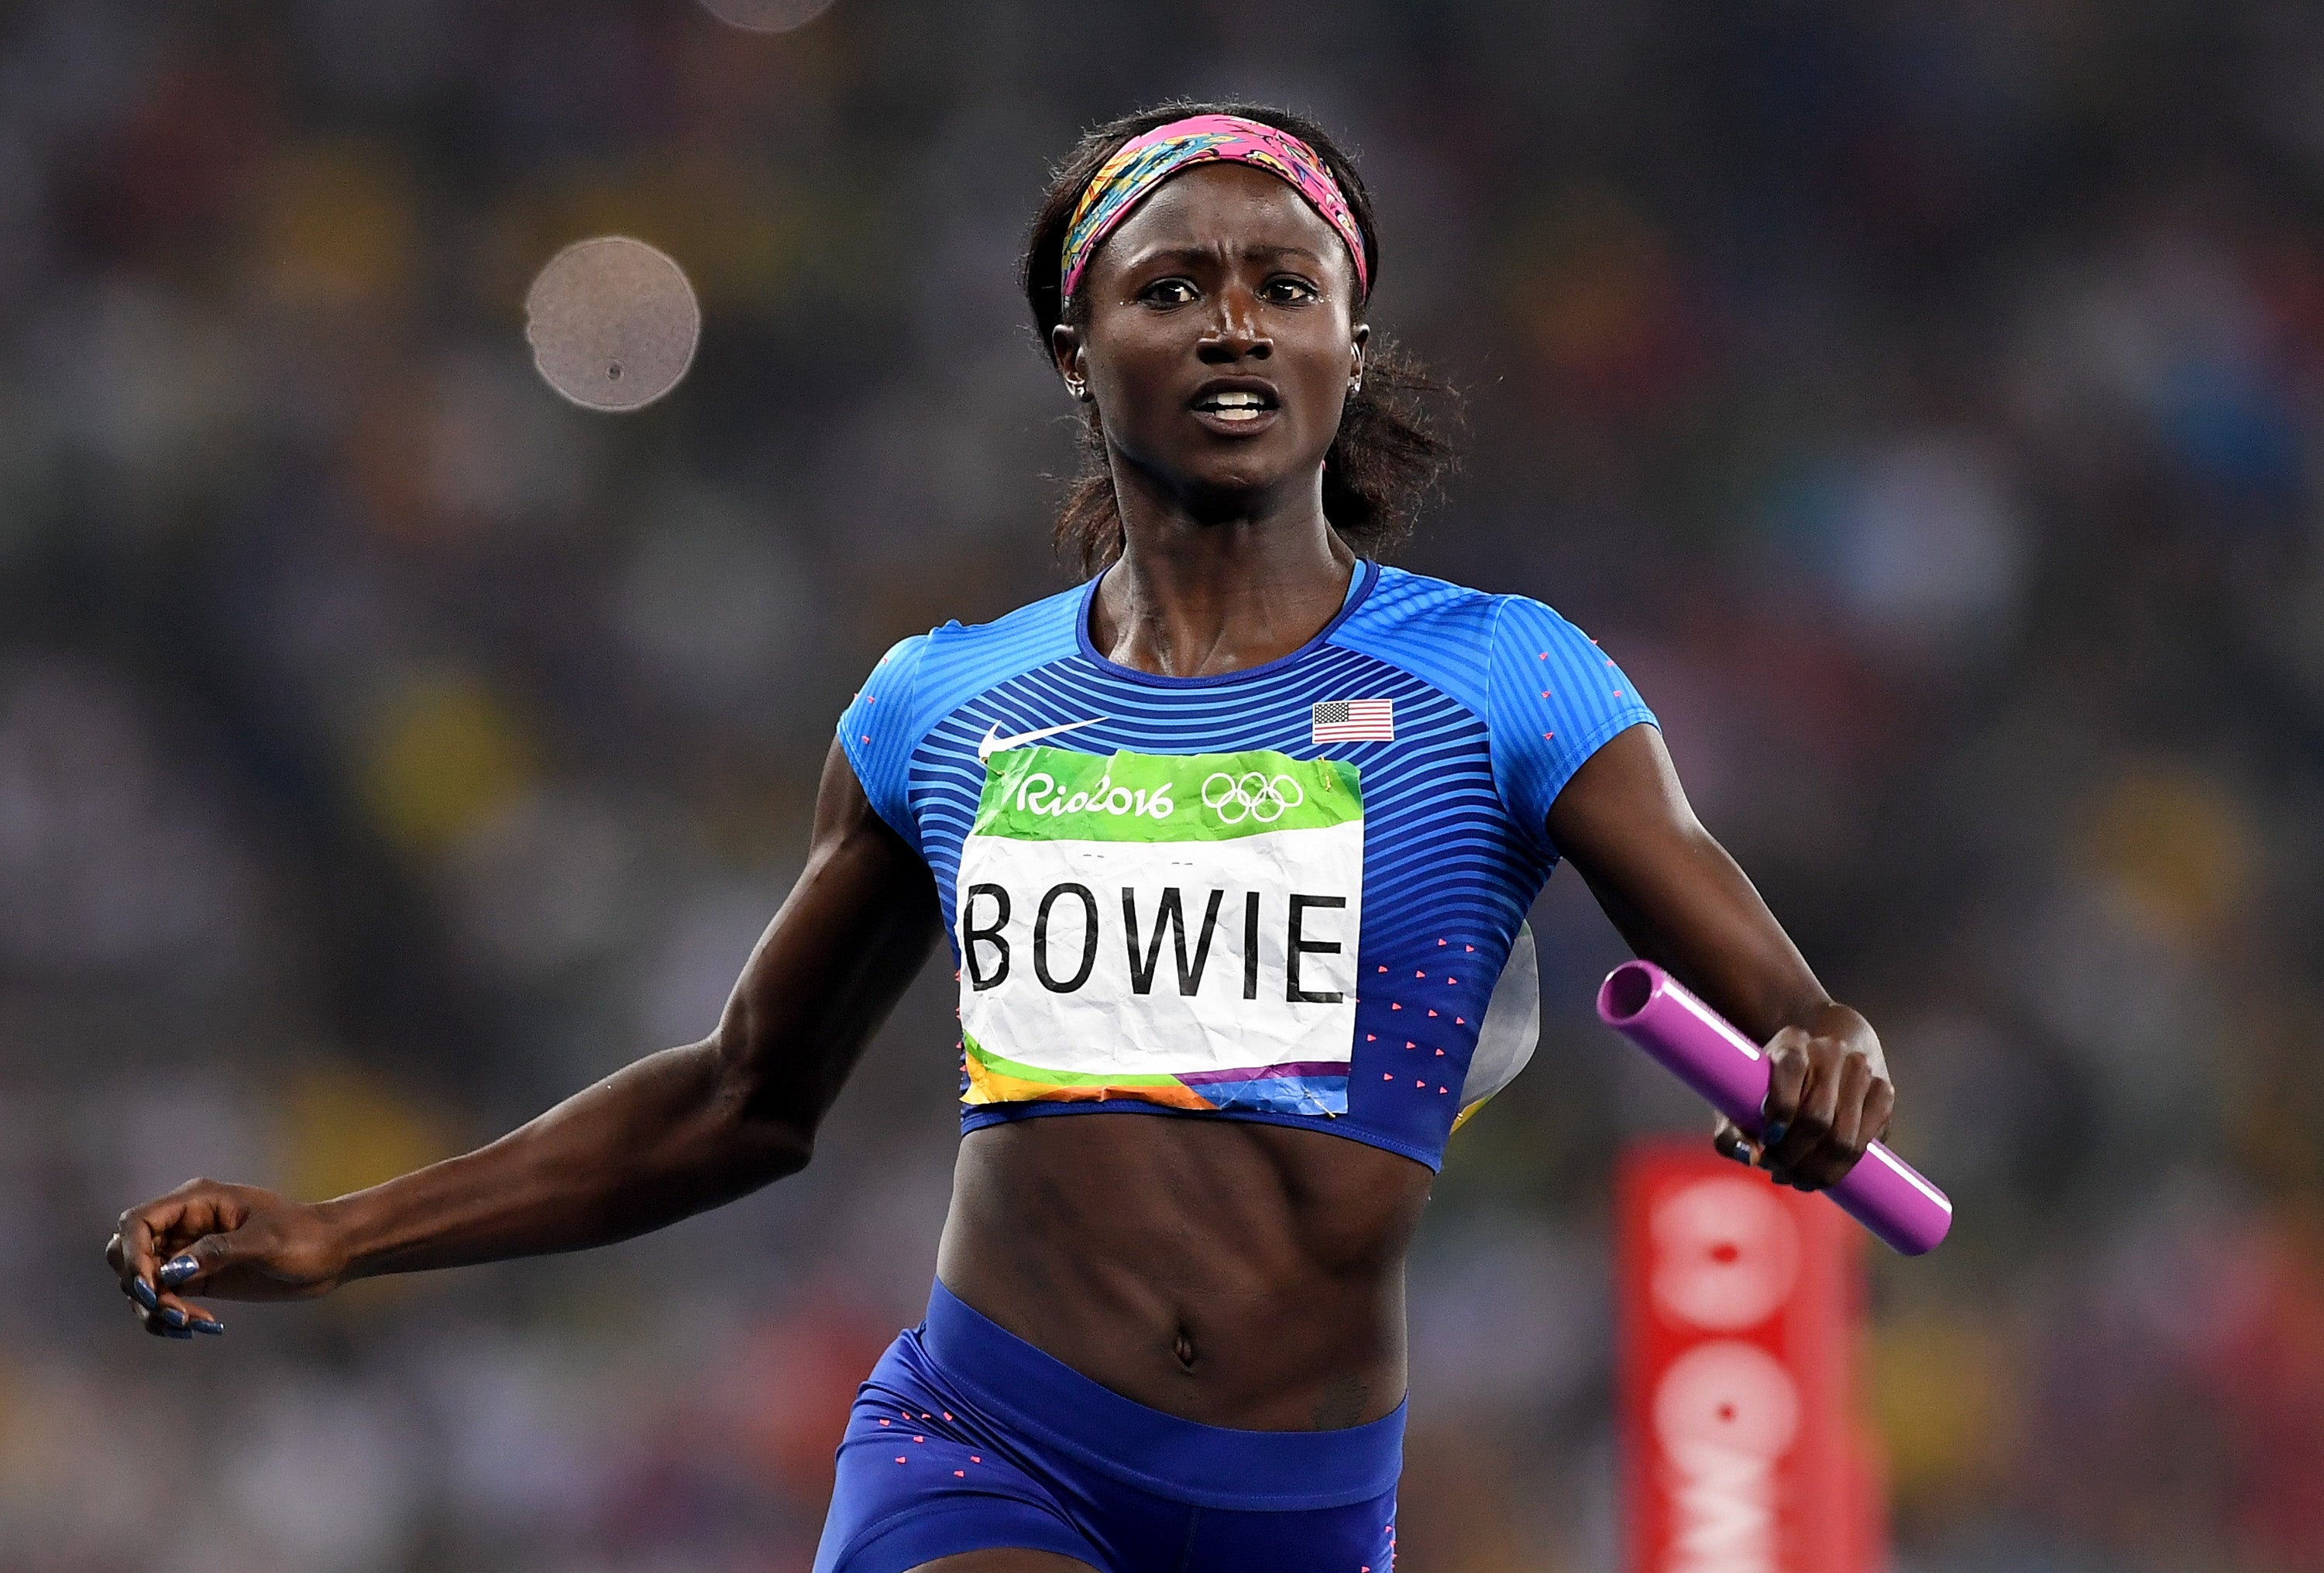 Tori Bowie crosses the finishline to win the Women's 4 x 100m Relay Final on Day 14 of the Rio 2016 Olympic Games at the Olympic Stadium on August 19, 2016 in Rio de Janeiro, Brazil